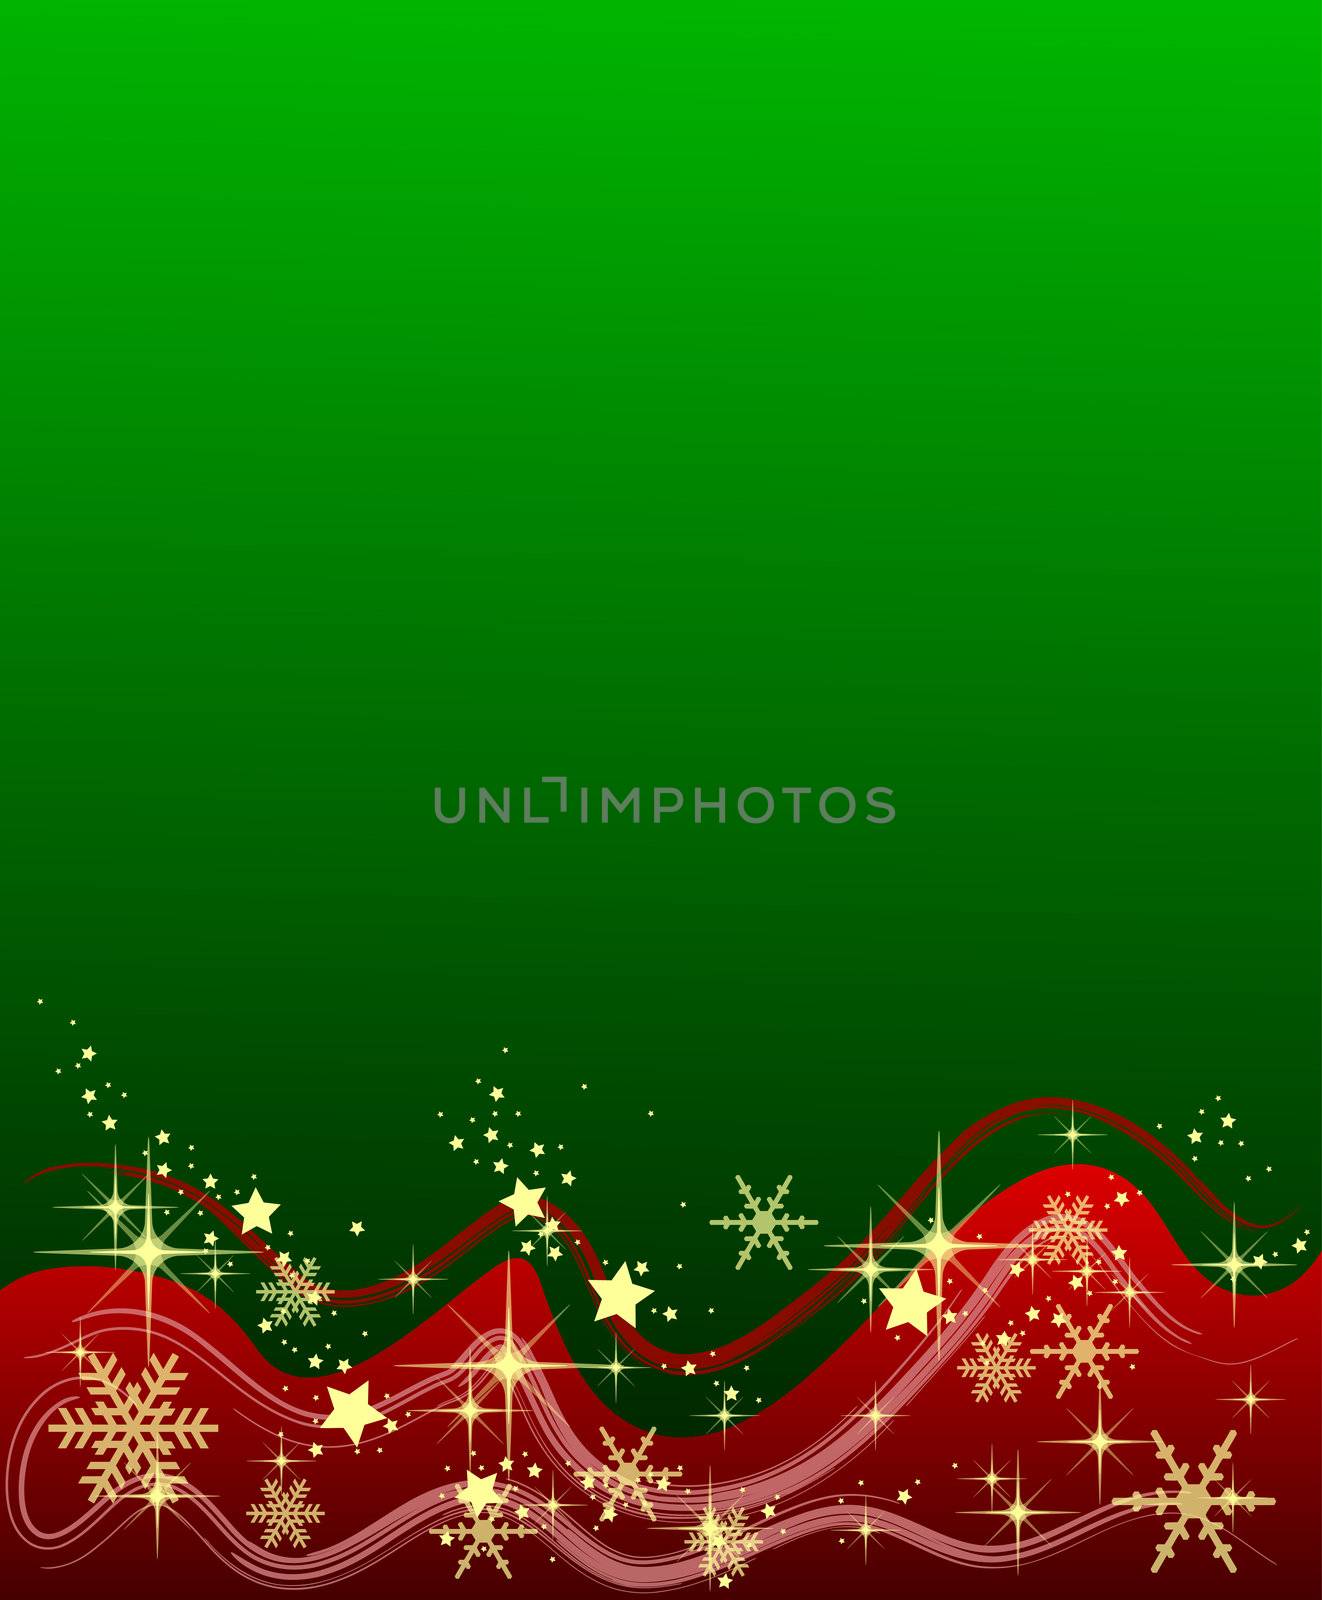 Illustration of a green background with stars and snowflakes